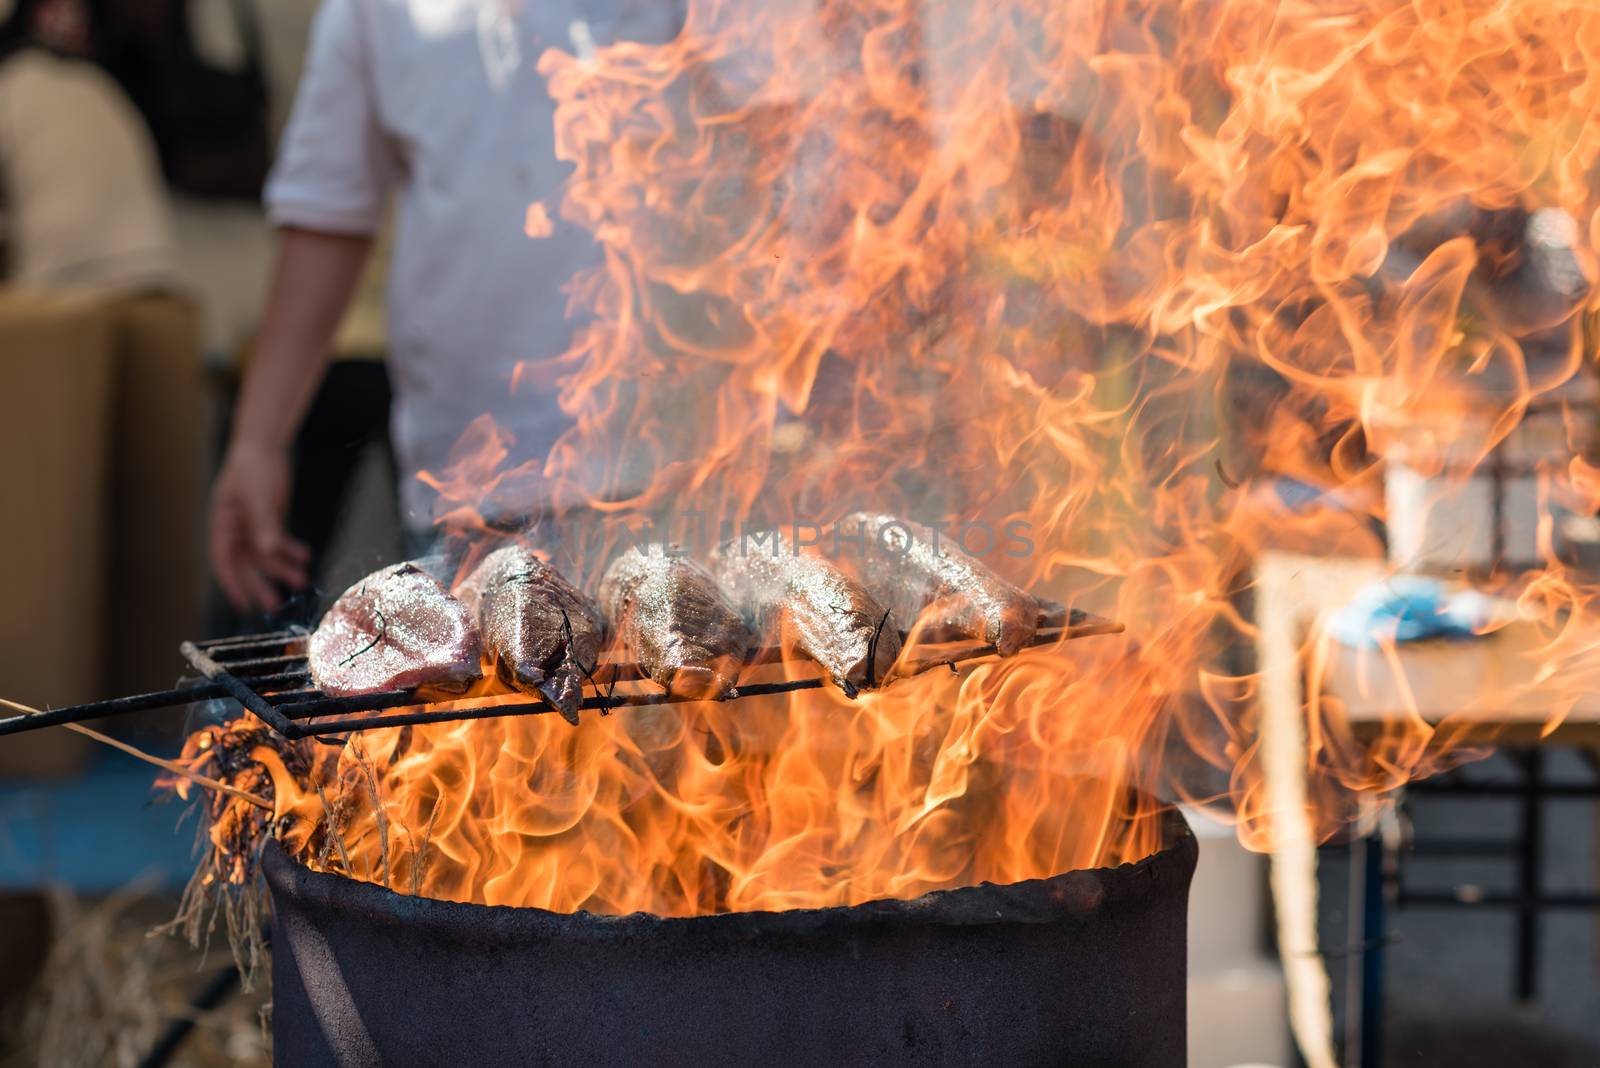 Japanese Bonito fish  being seared over an open flame in a barrel, kept raw on the inside.